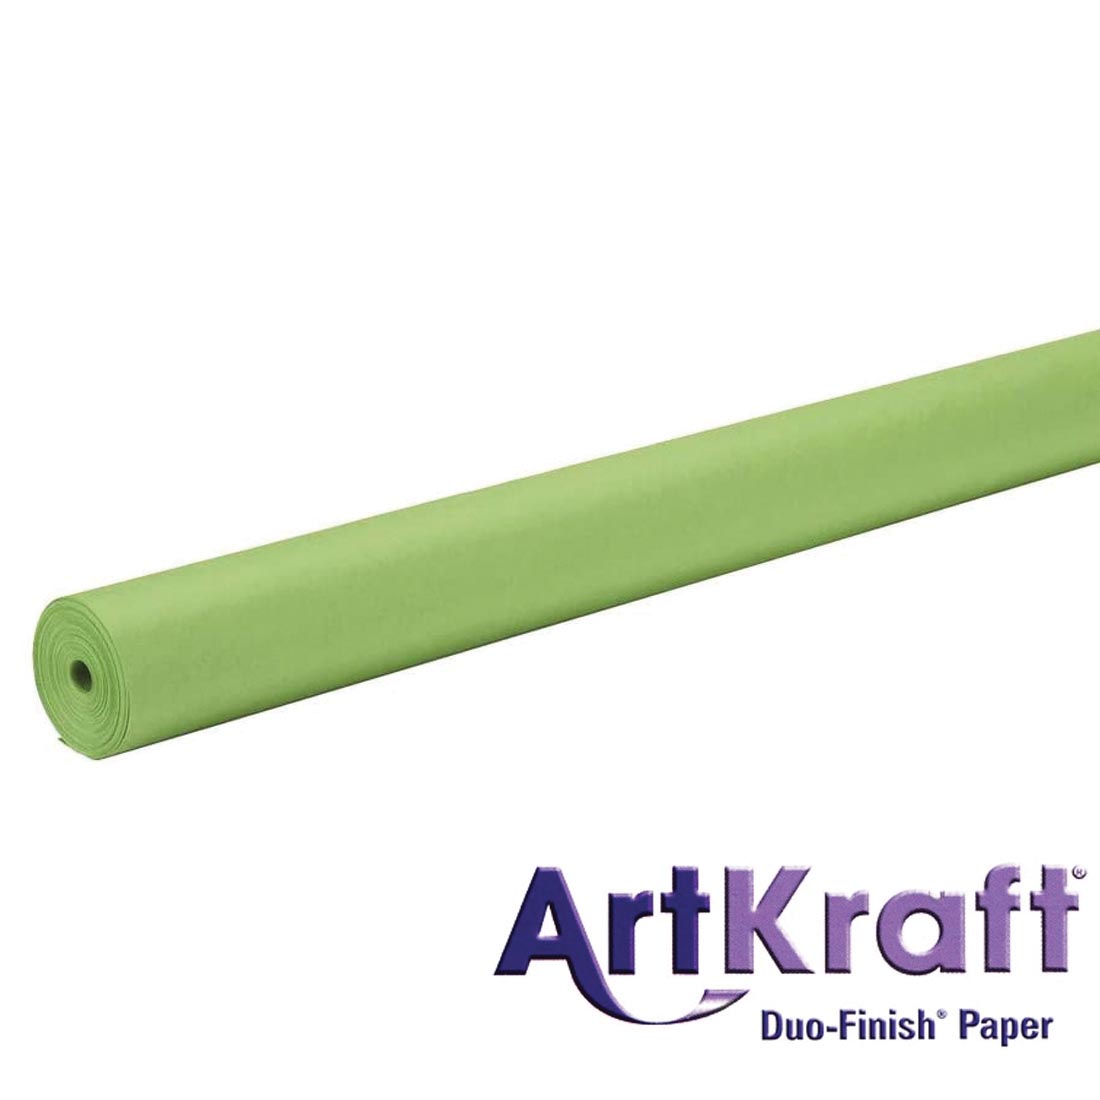 Roll of Lite Green Paper with text ArtKraft Duo-Finish Paper